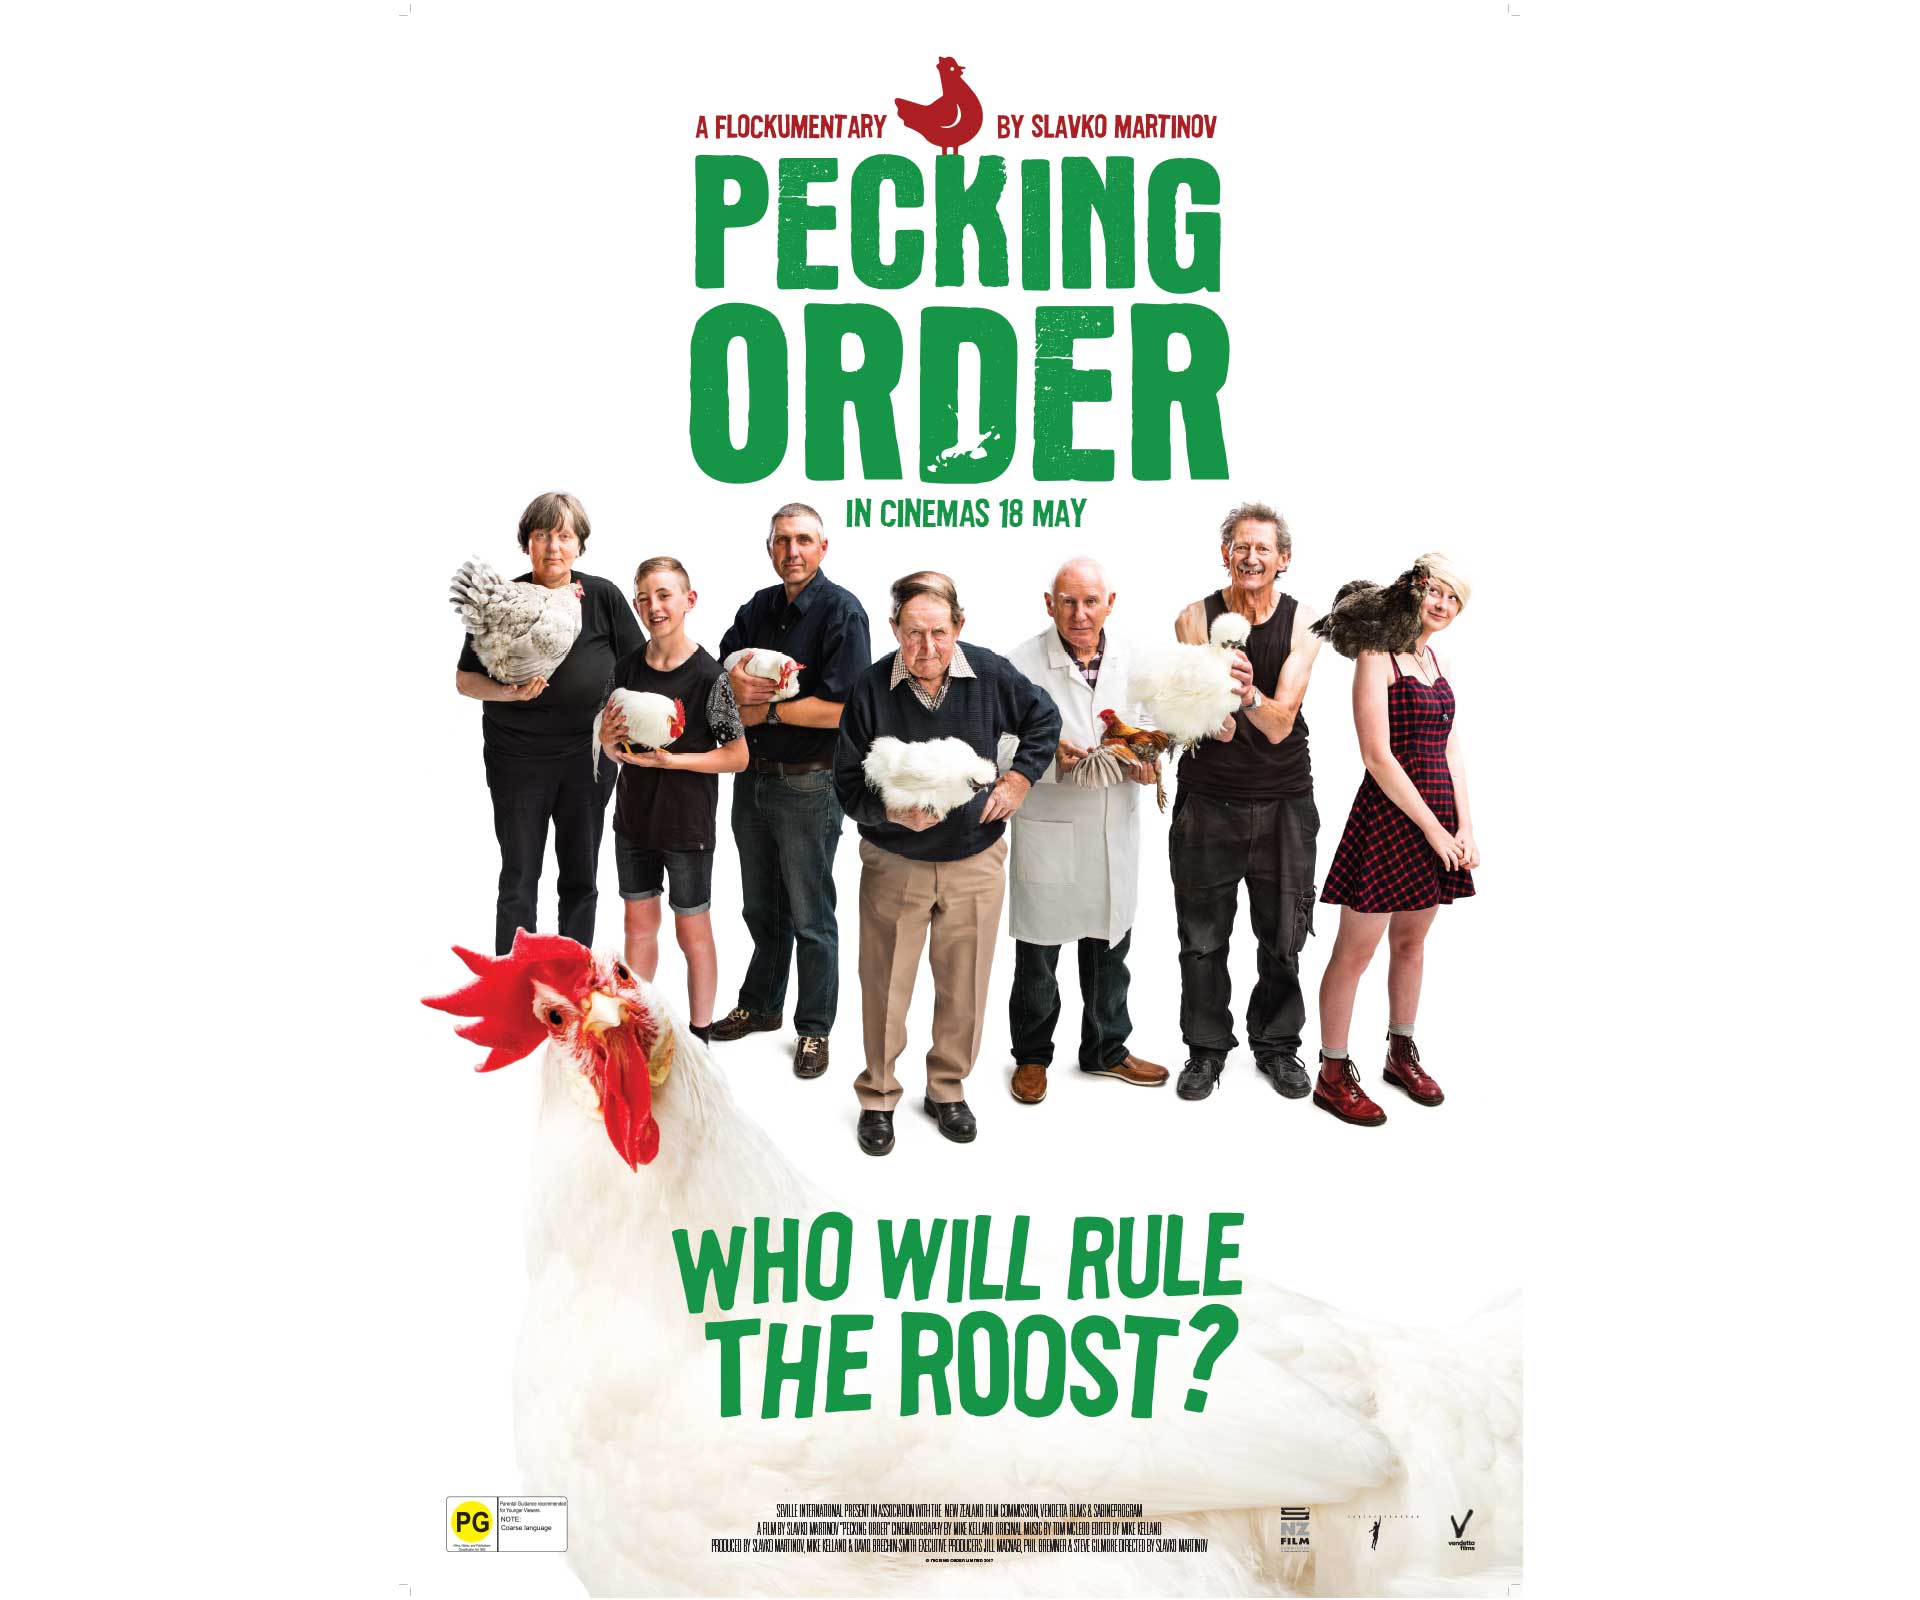 Win a double pass to see Pecking Order